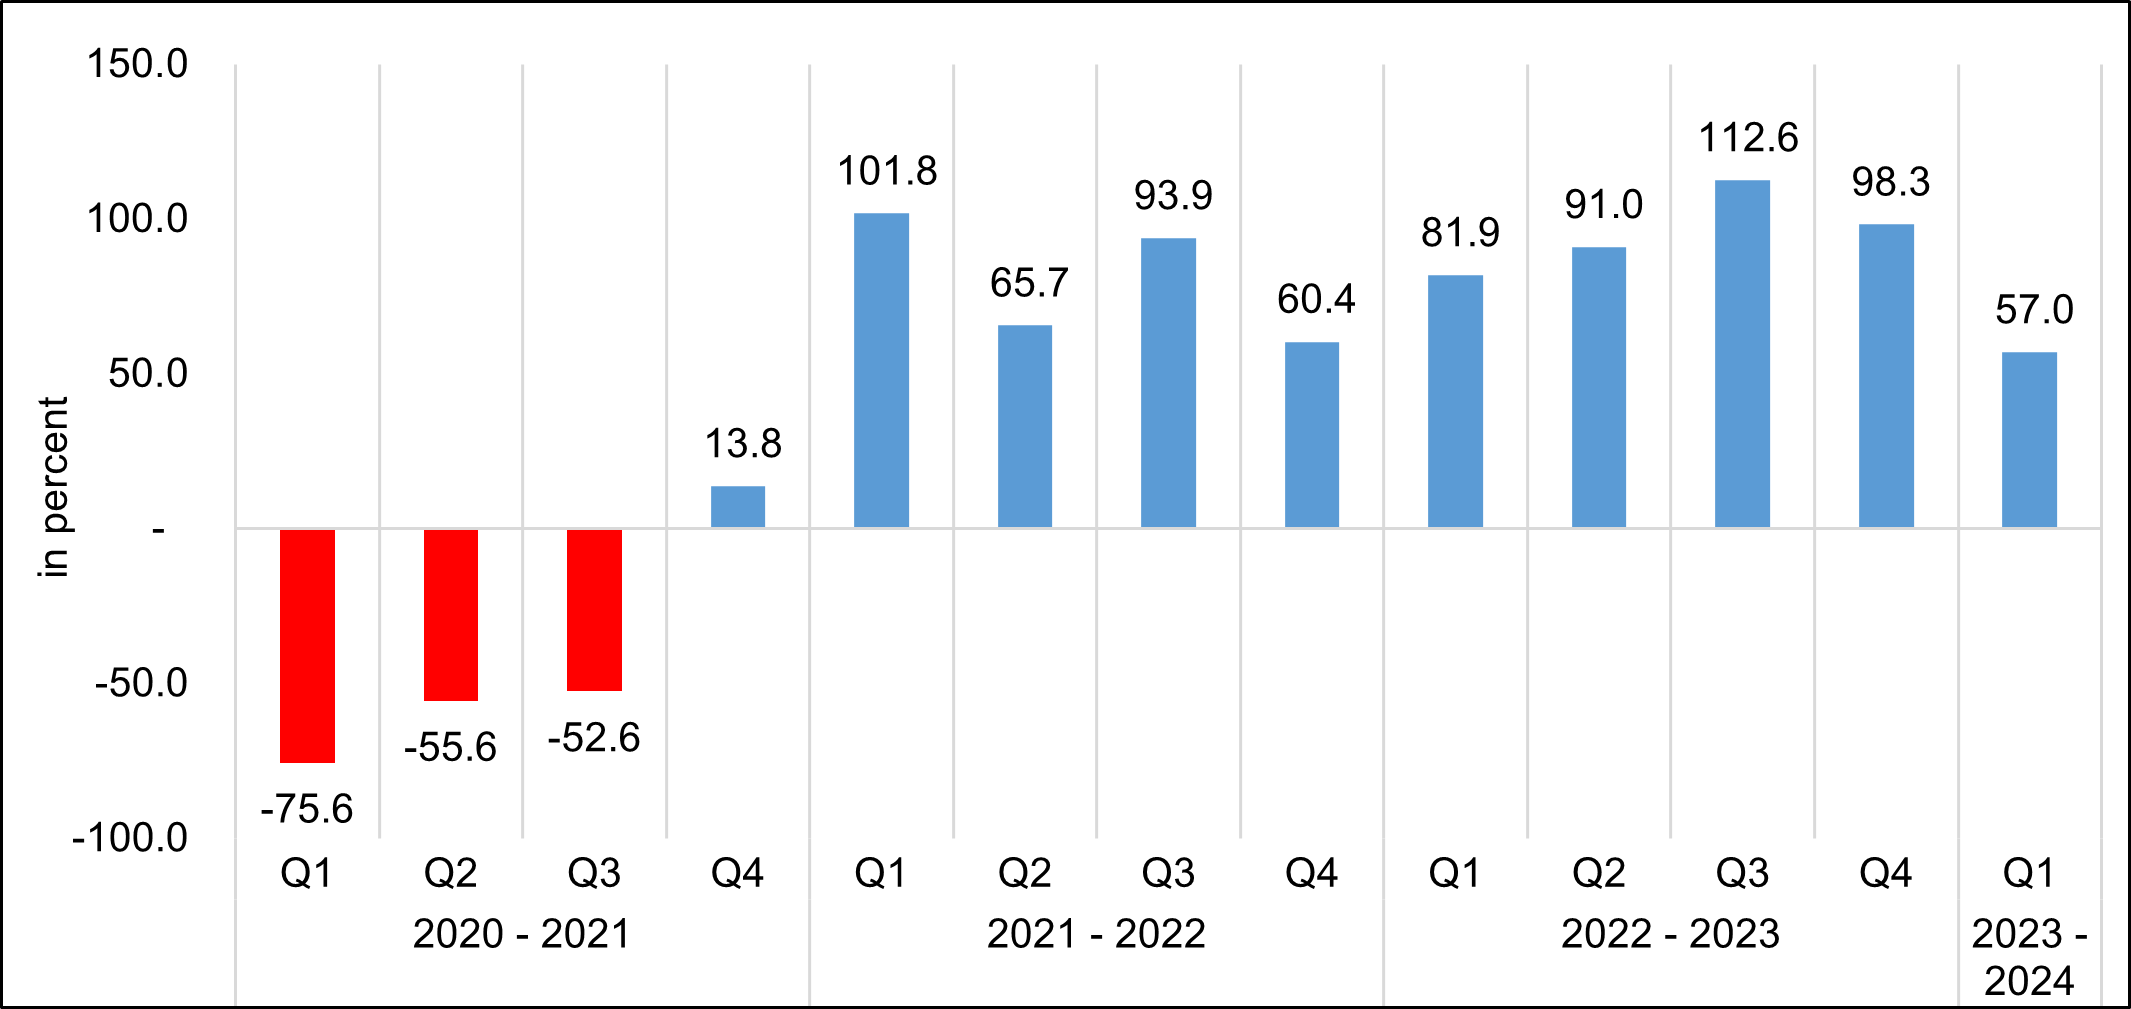 Figure 11. Net Primary Income, Q1 2021 to Q1 2024 Growth Rates,  At Constant 2018 prices